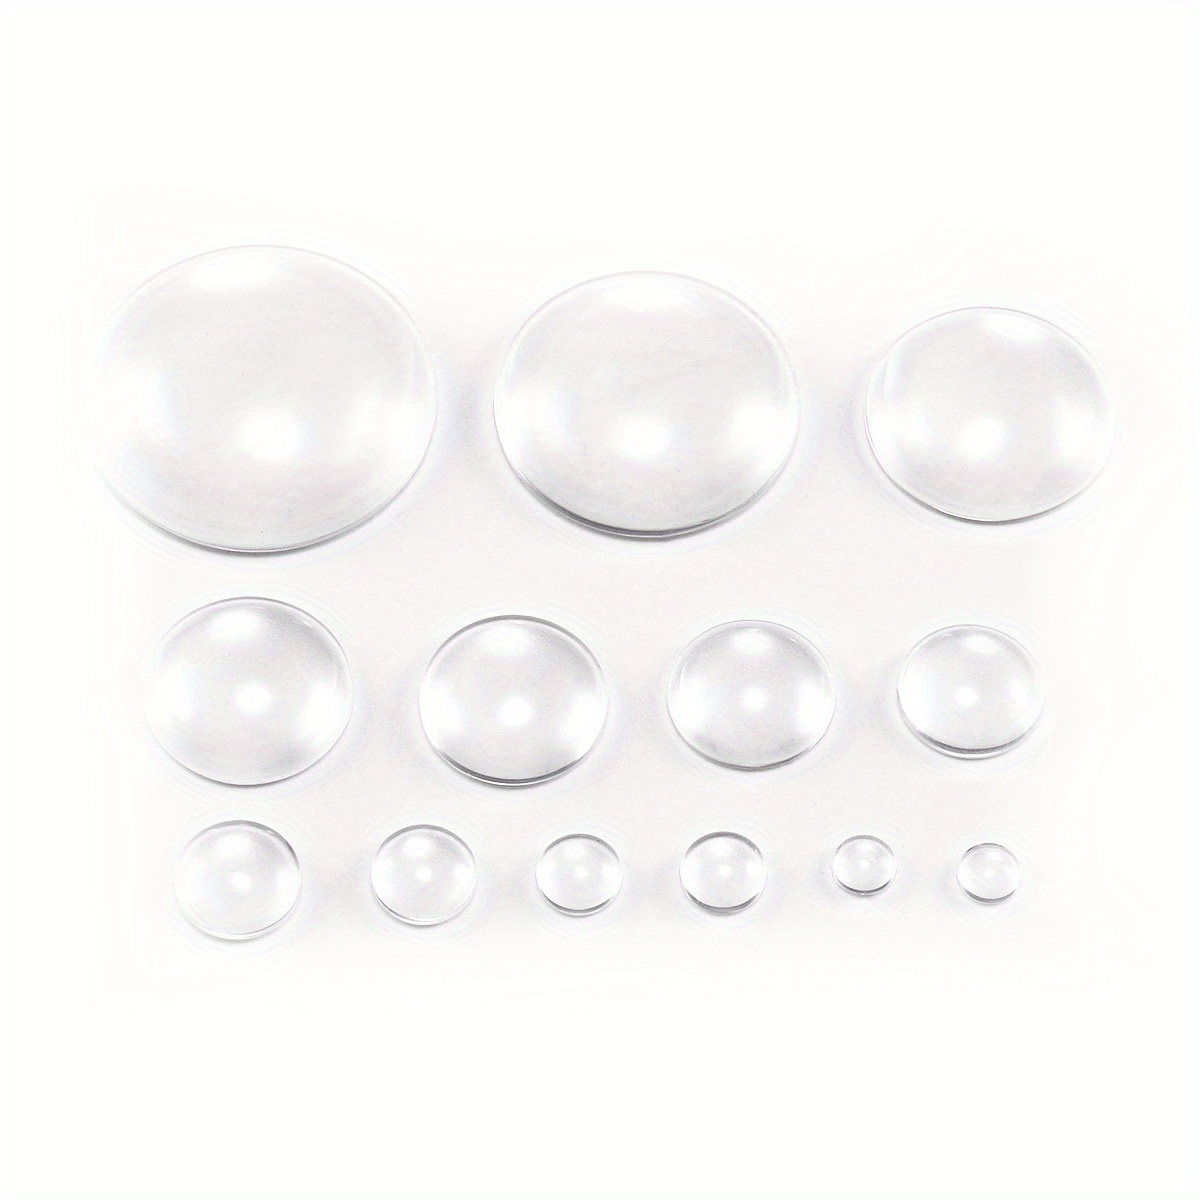 Glass Cabochon - Clear Transparent Round 30mm (Pack of 5)